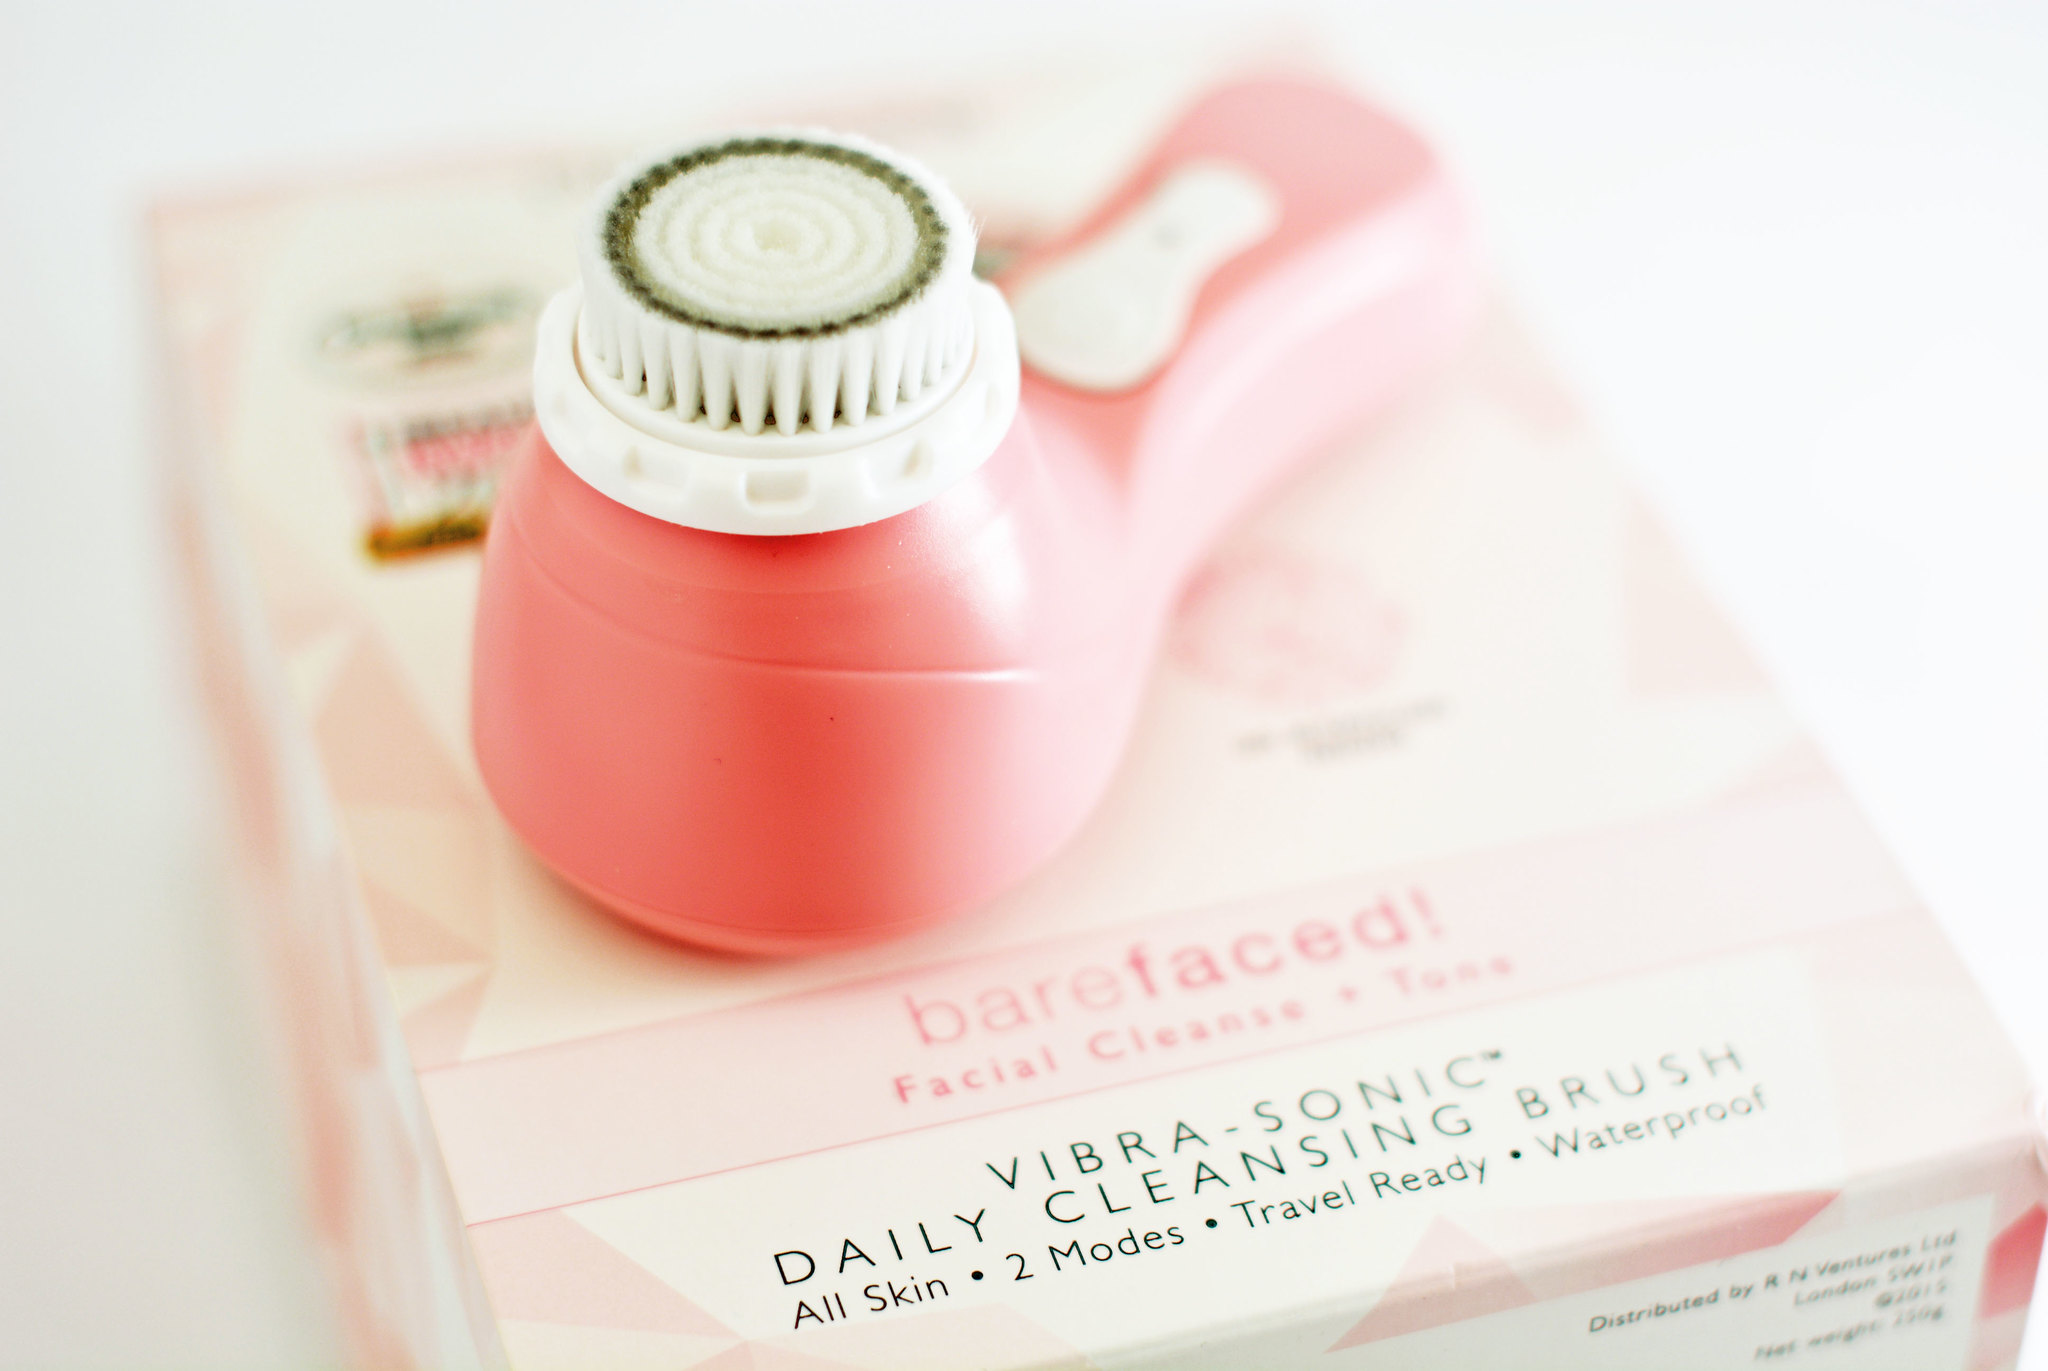 Win a Magnitone BareFaced Vibra-Sonic Daily Cleansing Brush (International Giveaway)